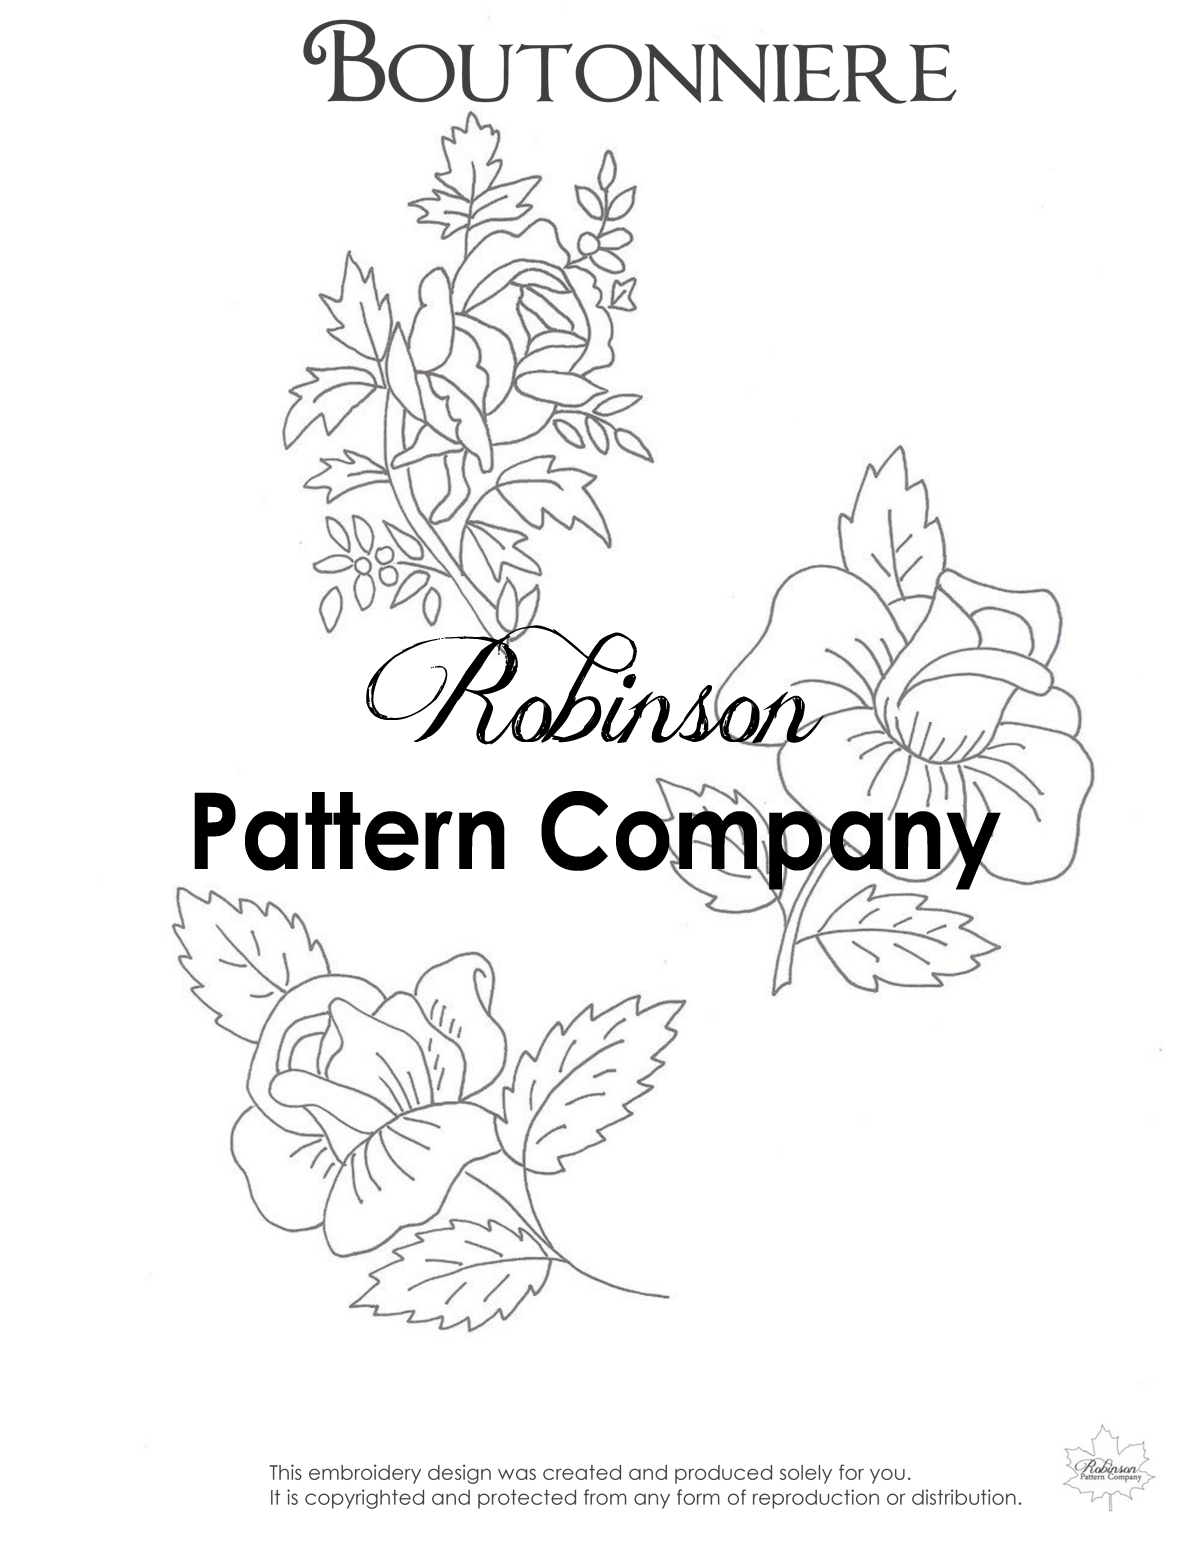 Boutonniere Hand Embroidery pattern